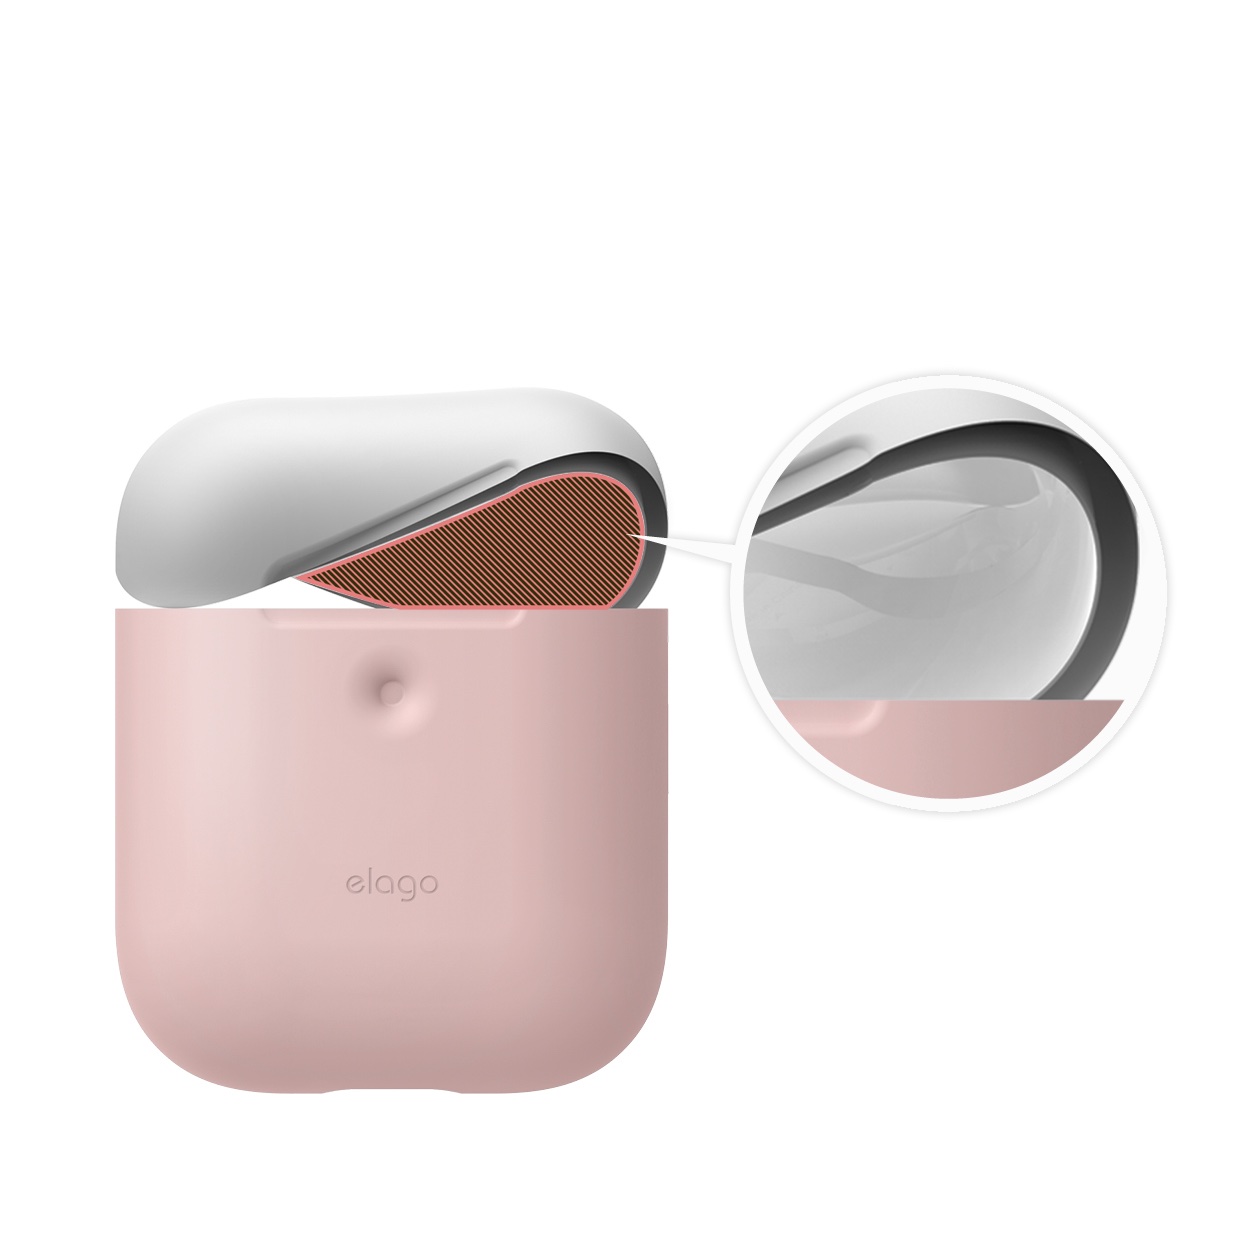 Чехол Elago A2 Duo Case Pink/White/Pastel Blue for Airpods with Wireless Charging Case (EAP2DO-PK-WHPBL)